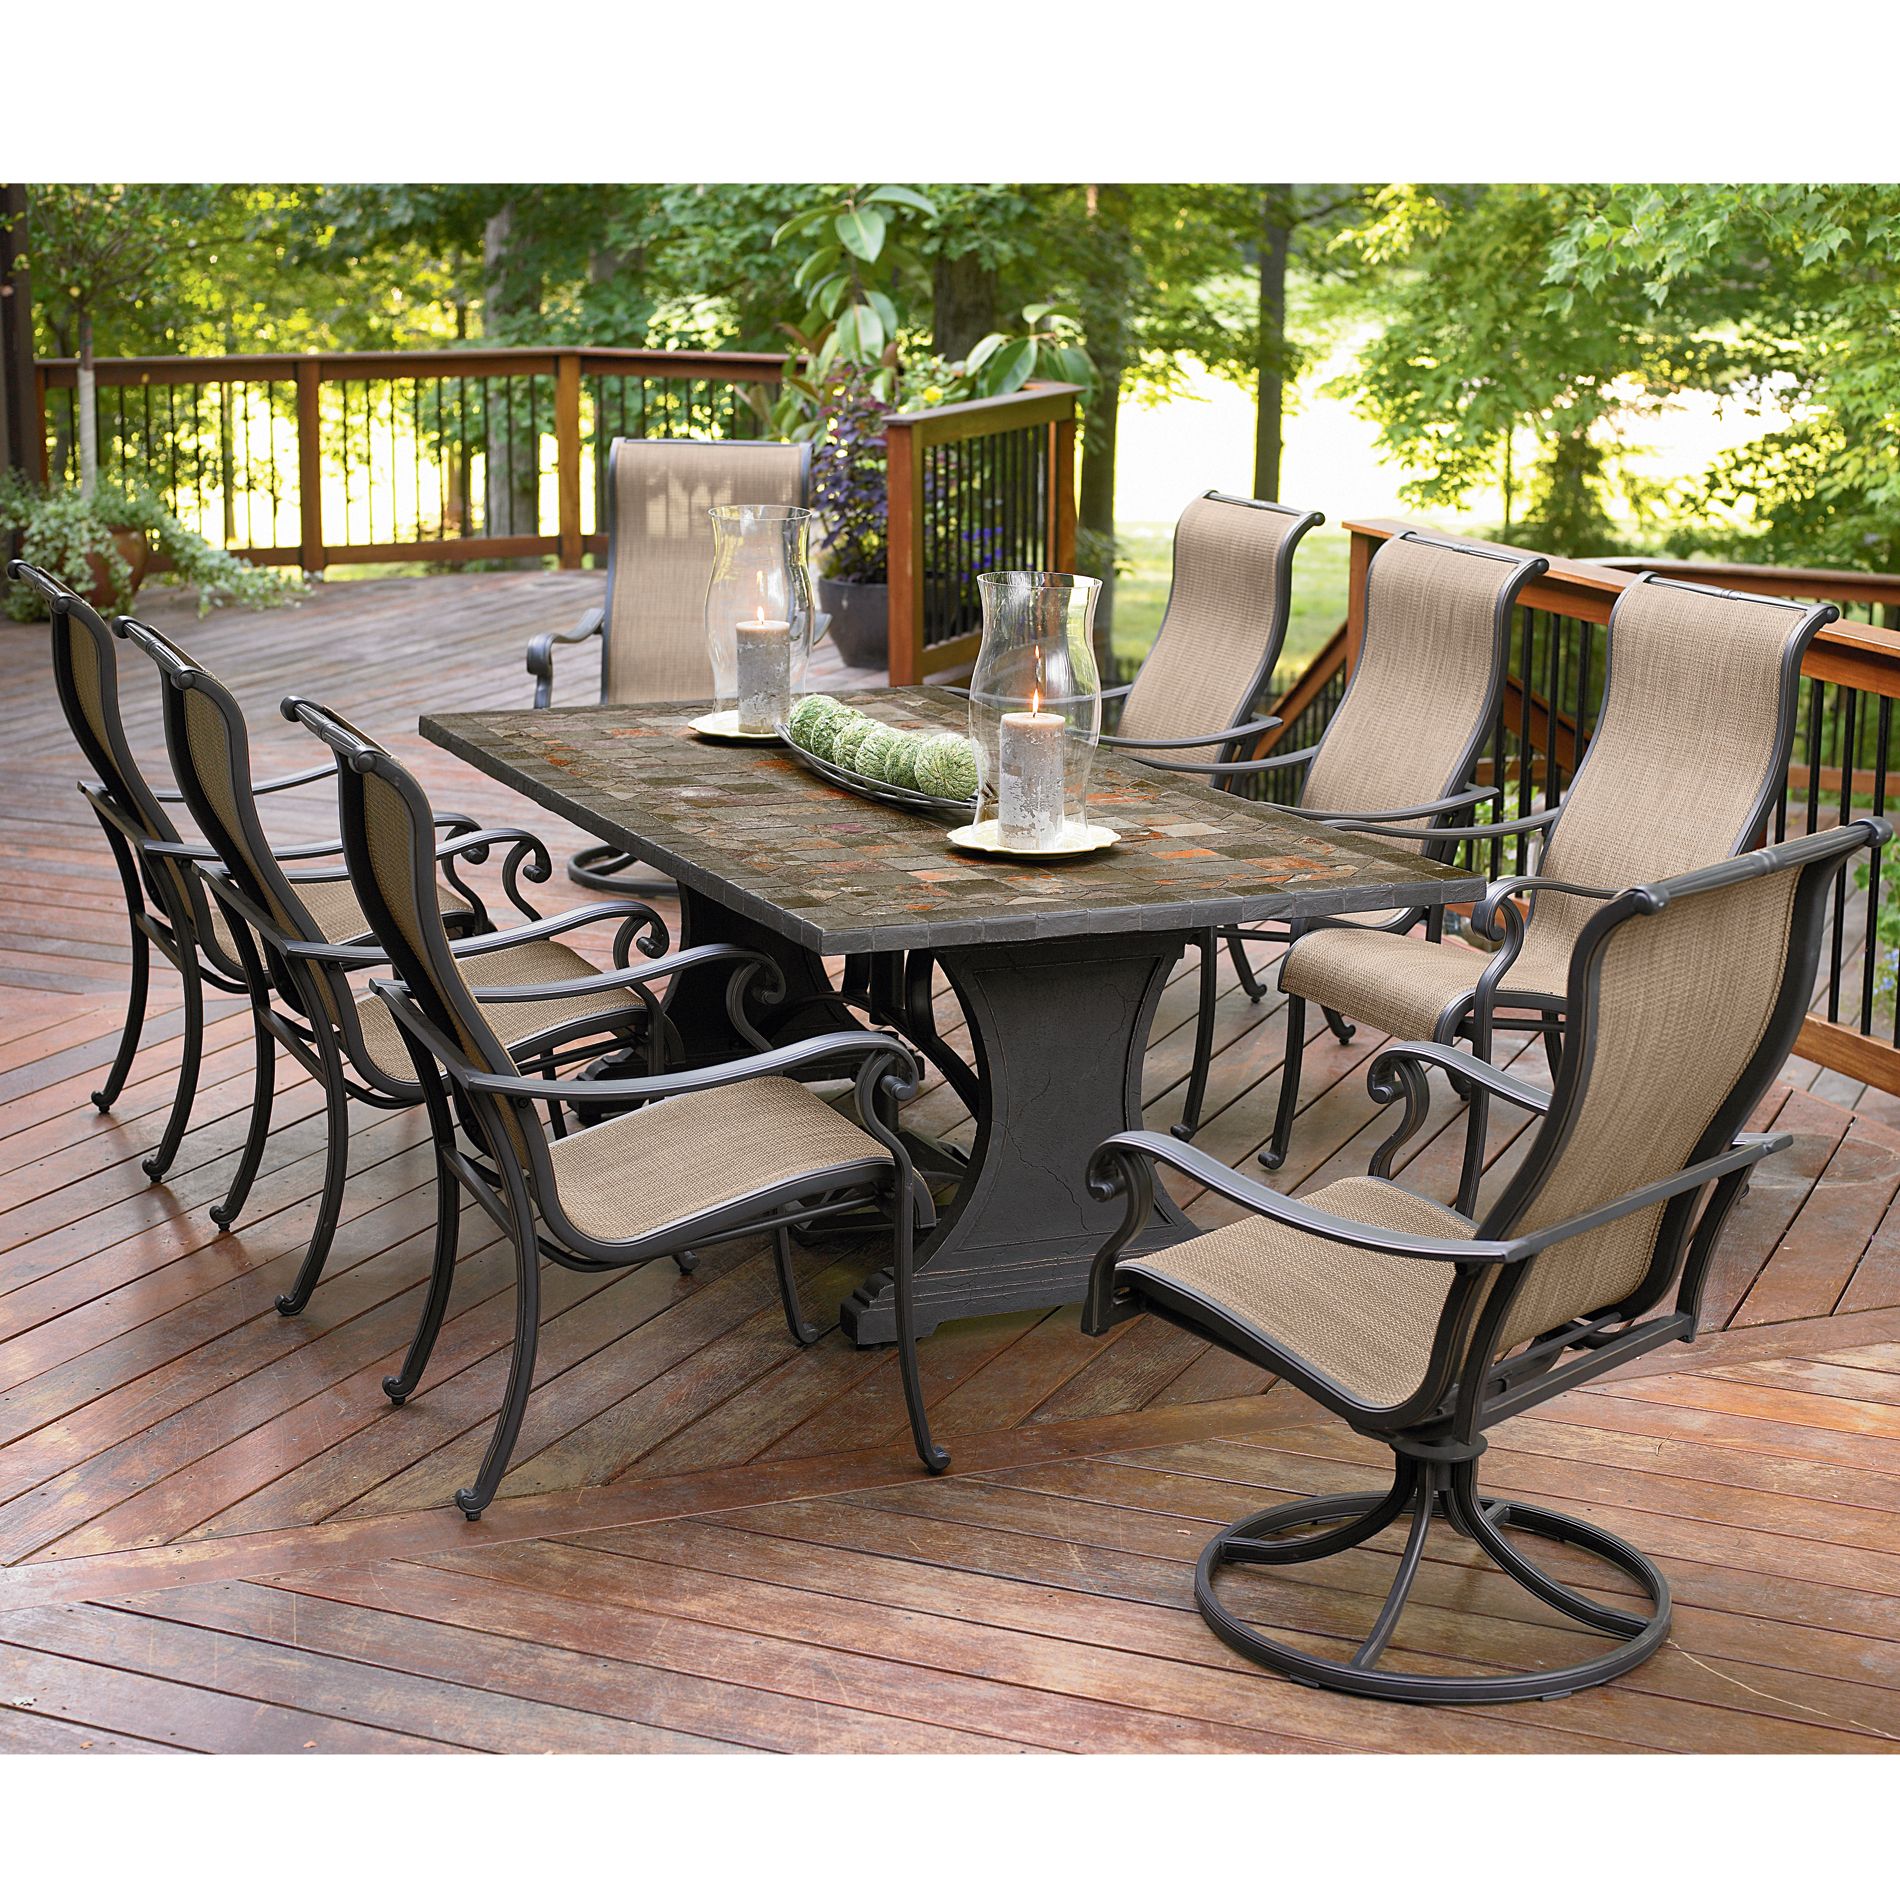 patio dining sets furniture photo - 9